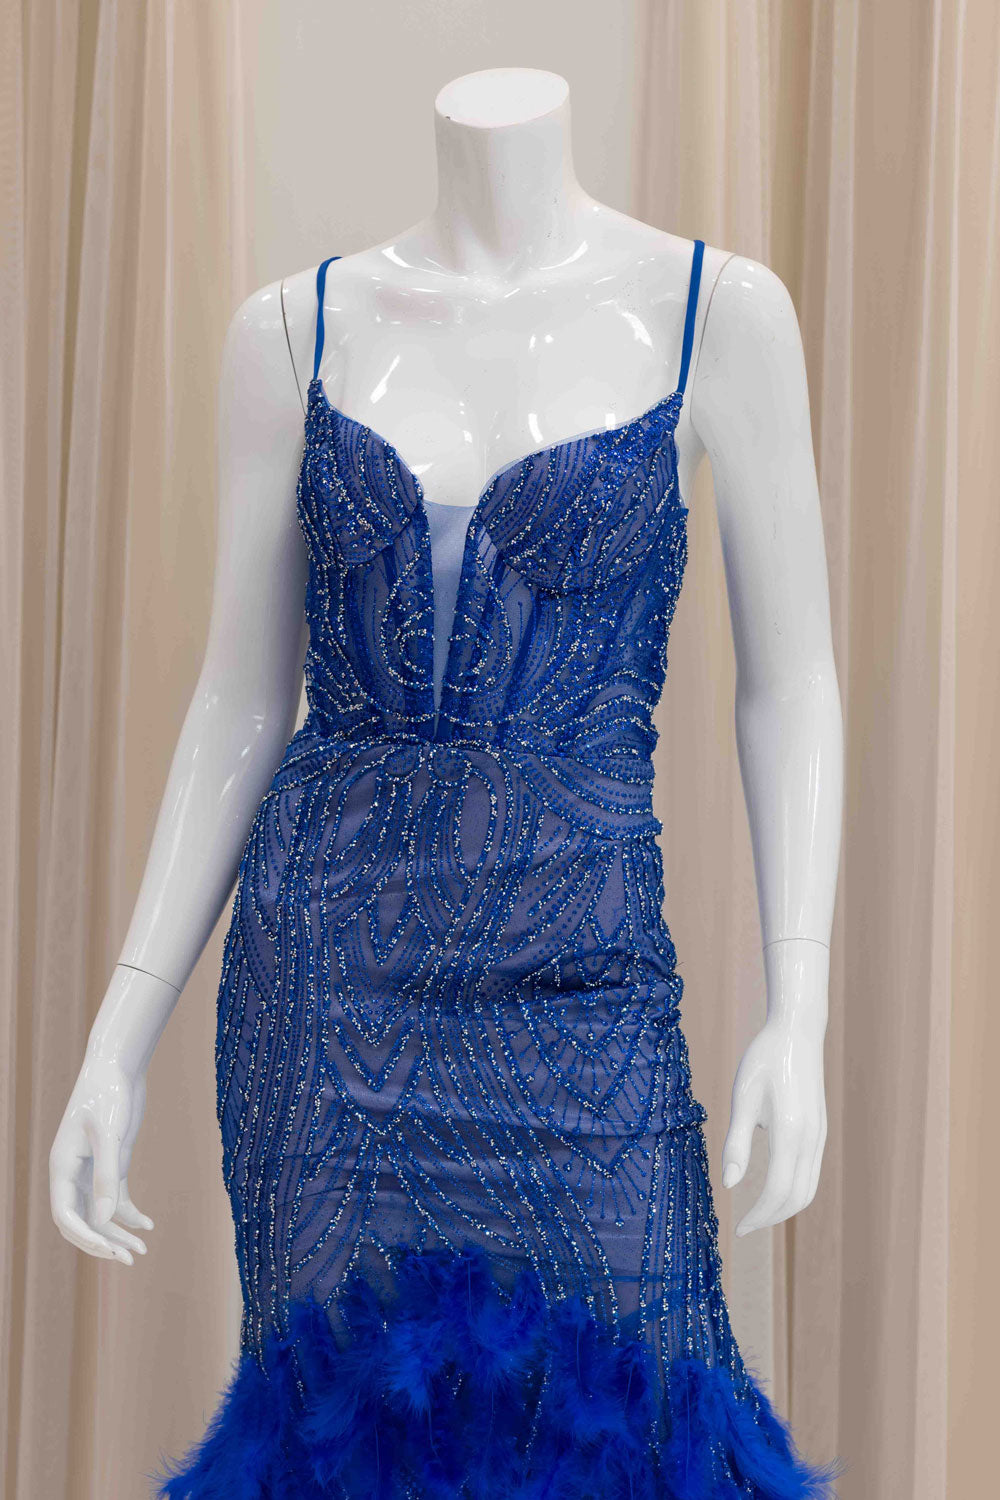 Mermaid Prom Dress with Feathers in Royal Blue